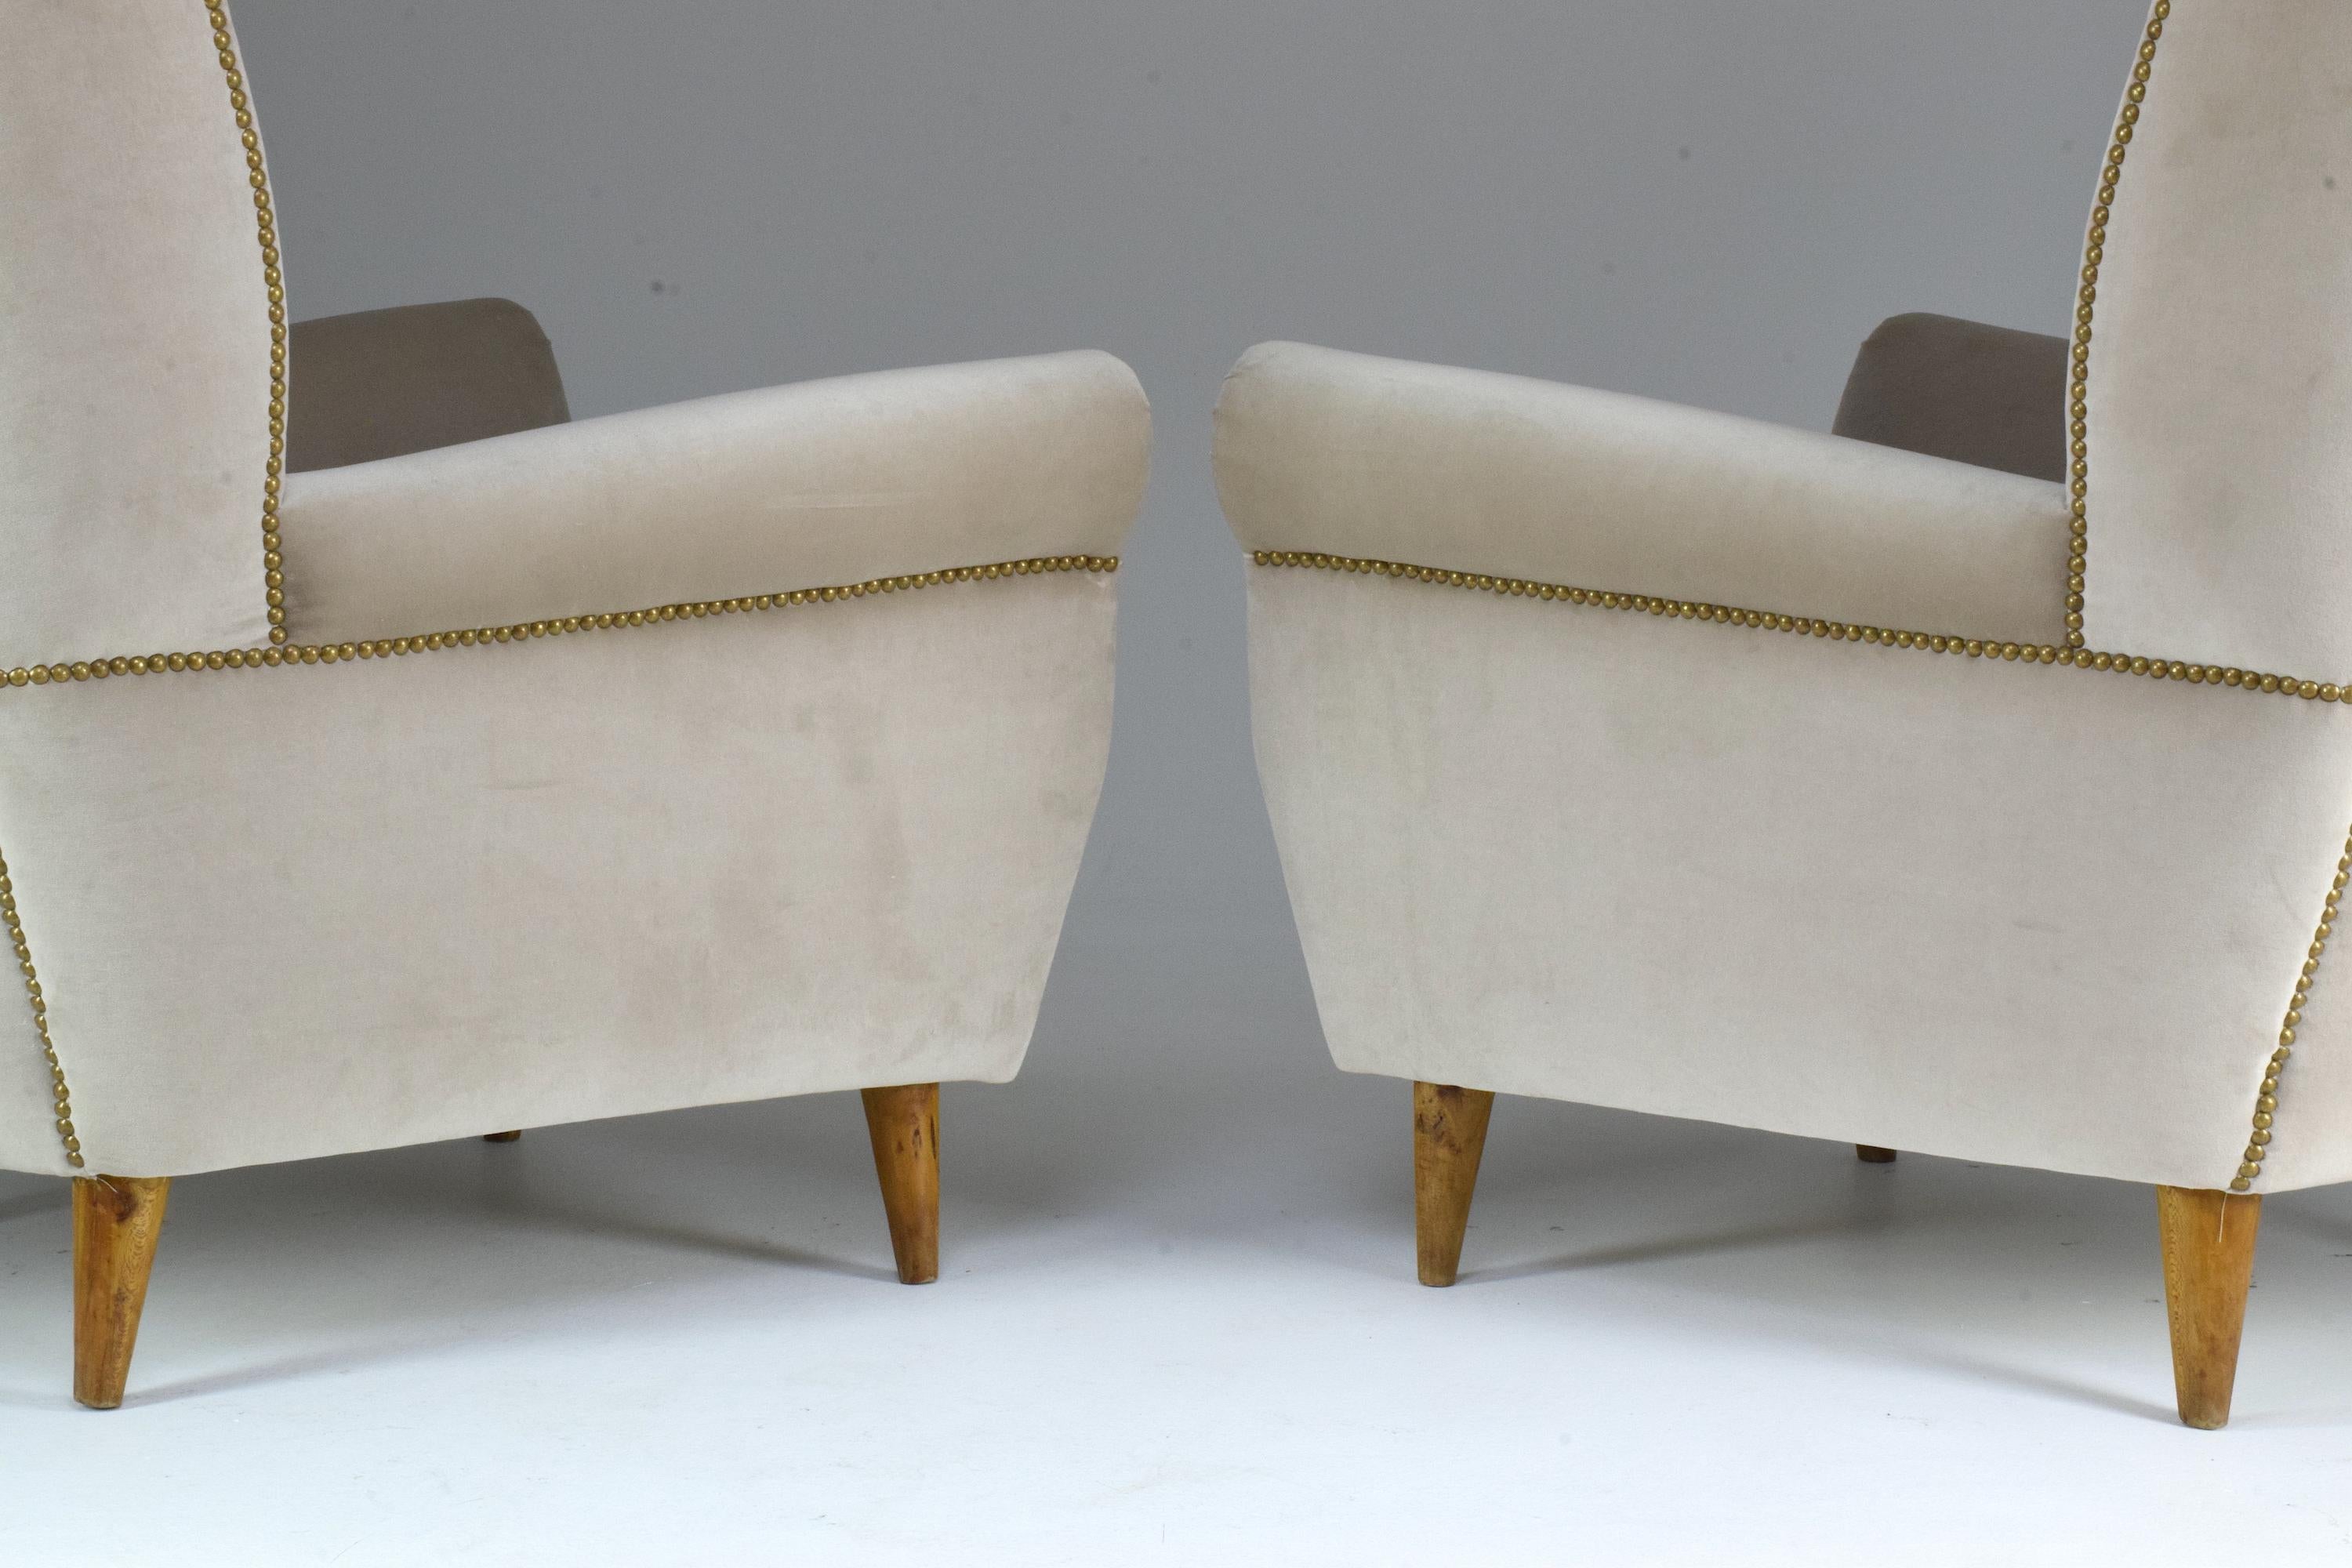 Pair of 20th Century Armchairs In the Style of Gio Ponti, 1940s For Sale 5